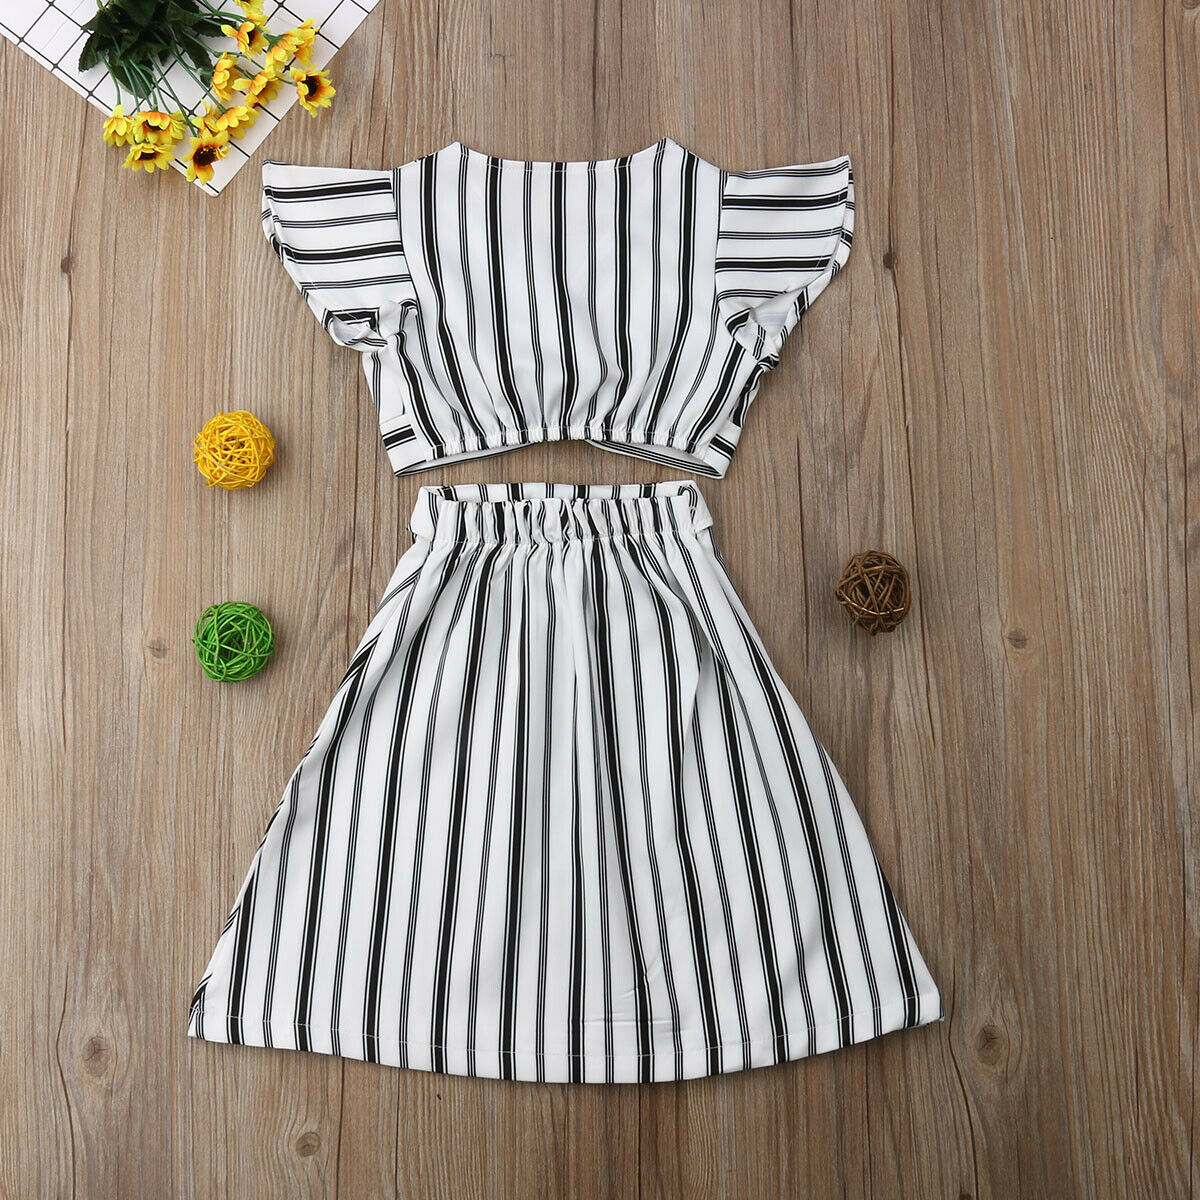 Kids Baby Girls Sleeveless Crop Tops+A-line Skirt Striped Clothes Outfit Set - image 5 of 5